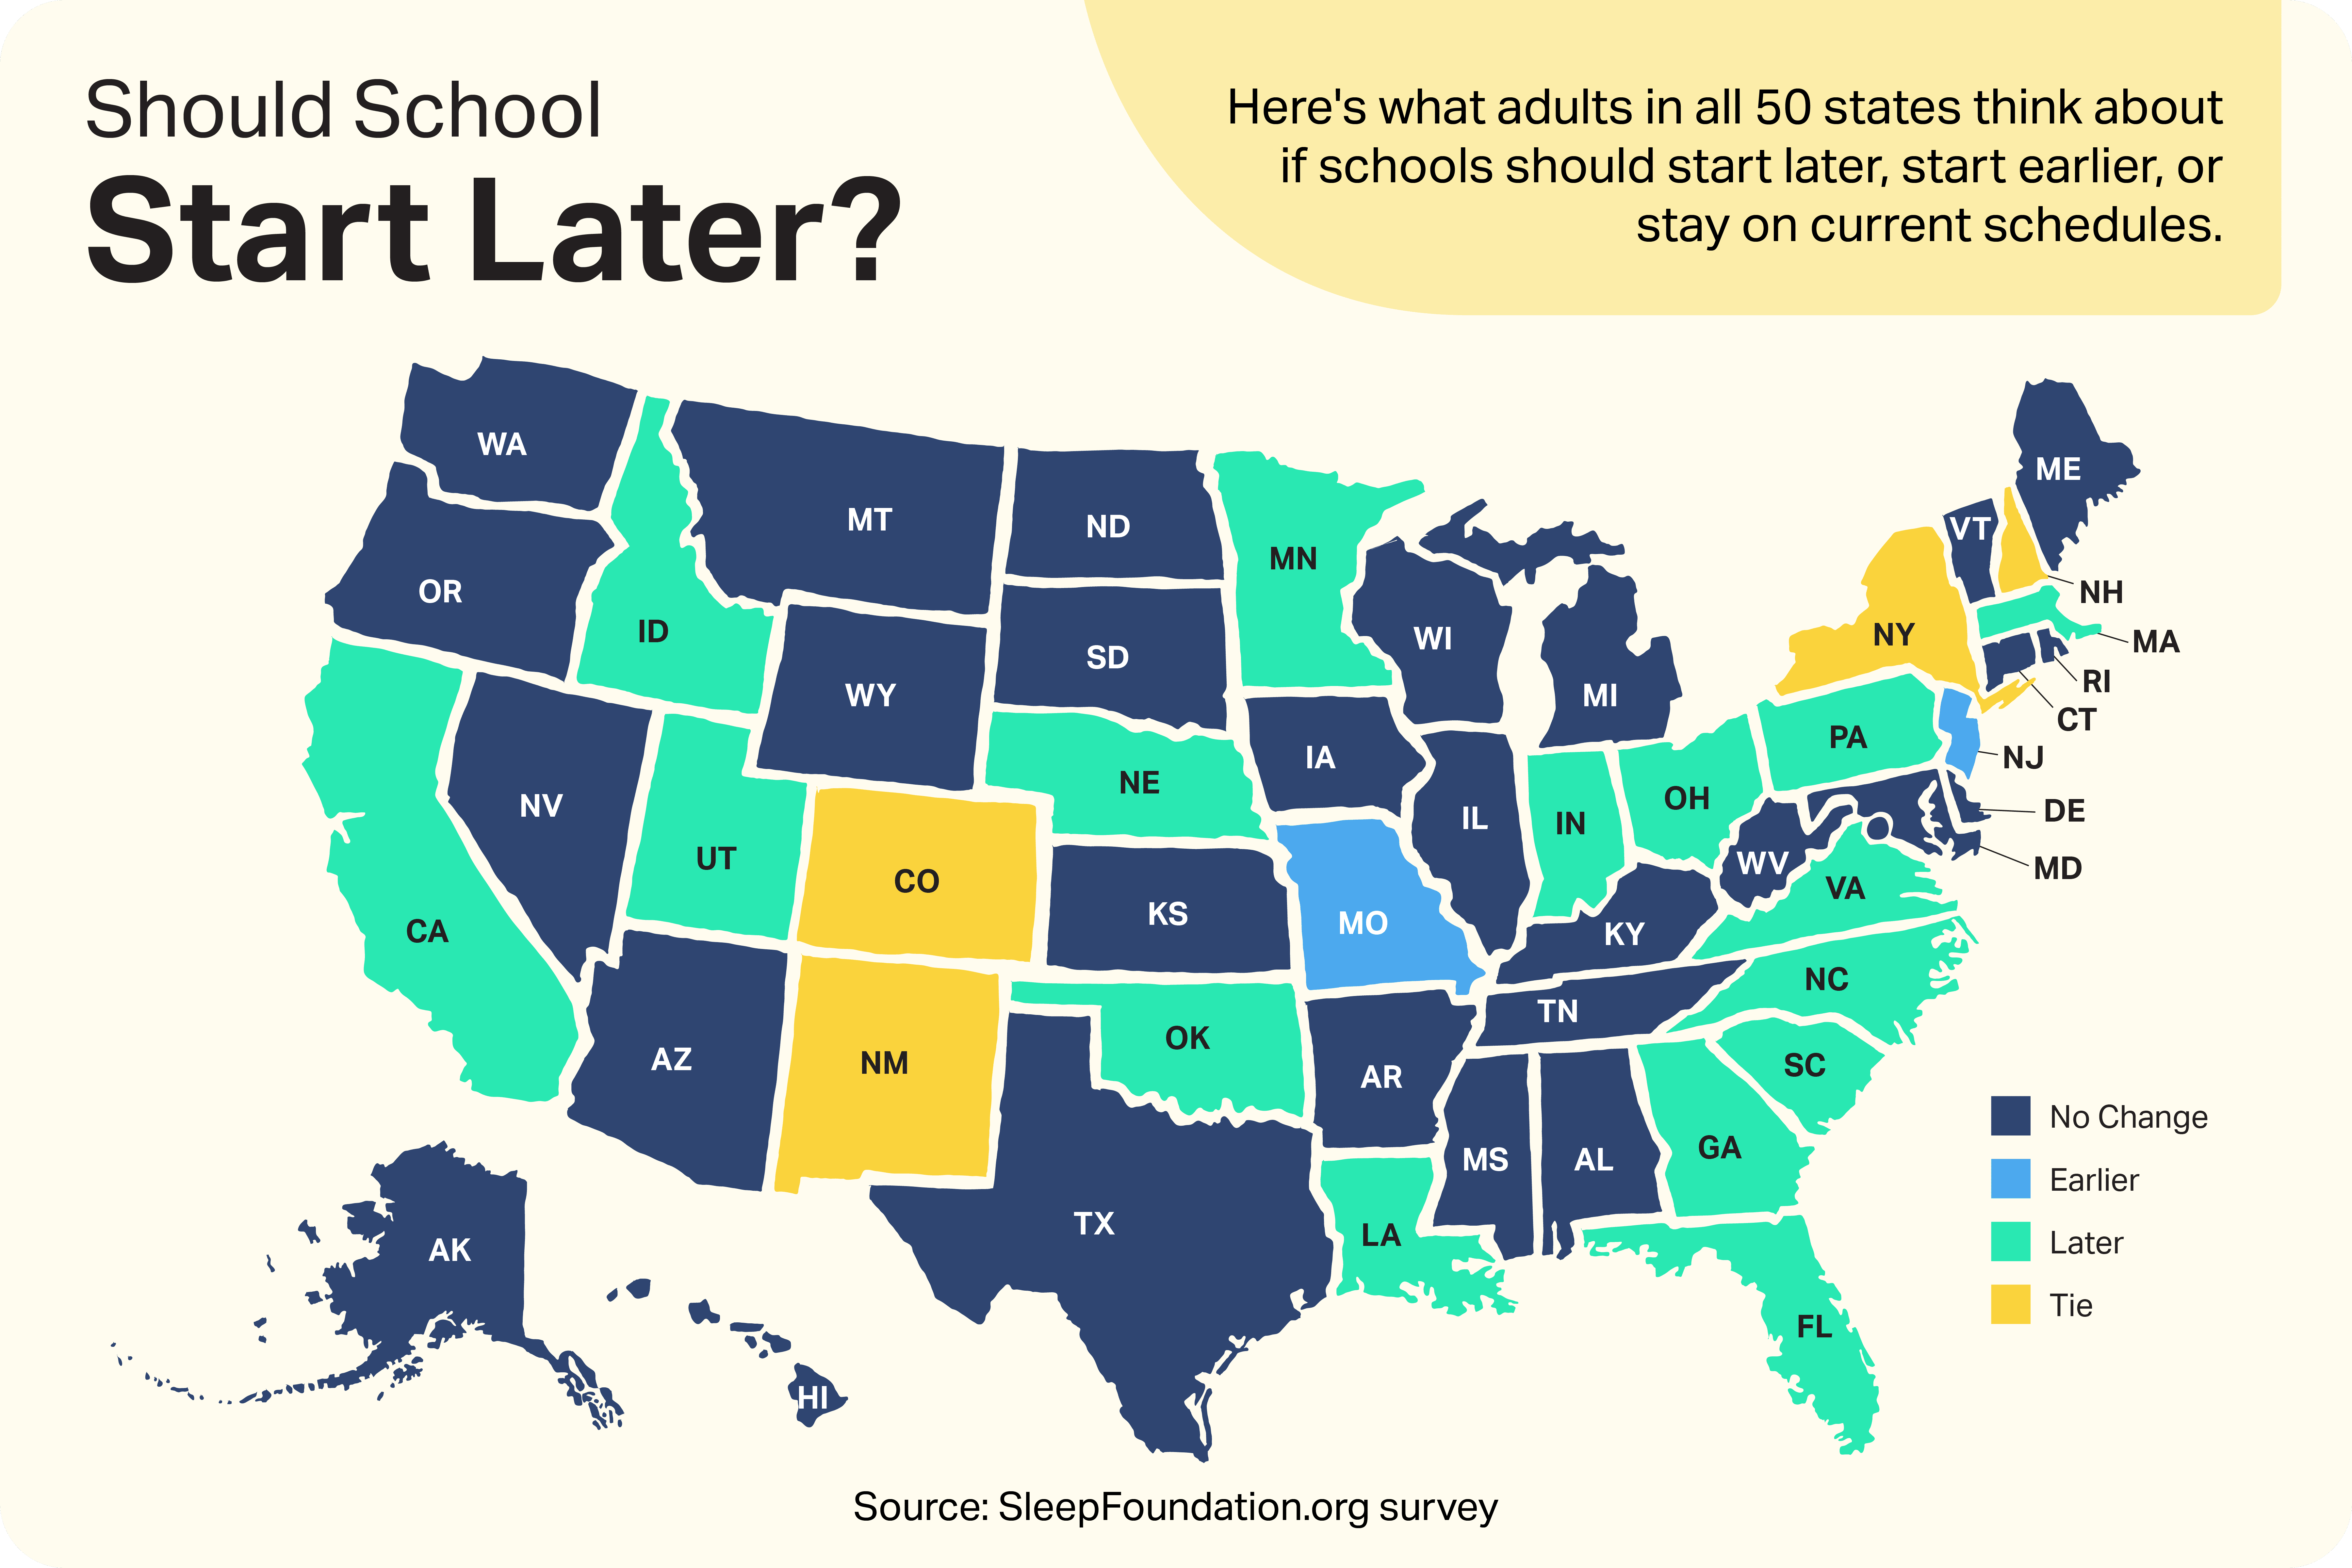 Should School Start Later? Here's What Surveyed Adults Say